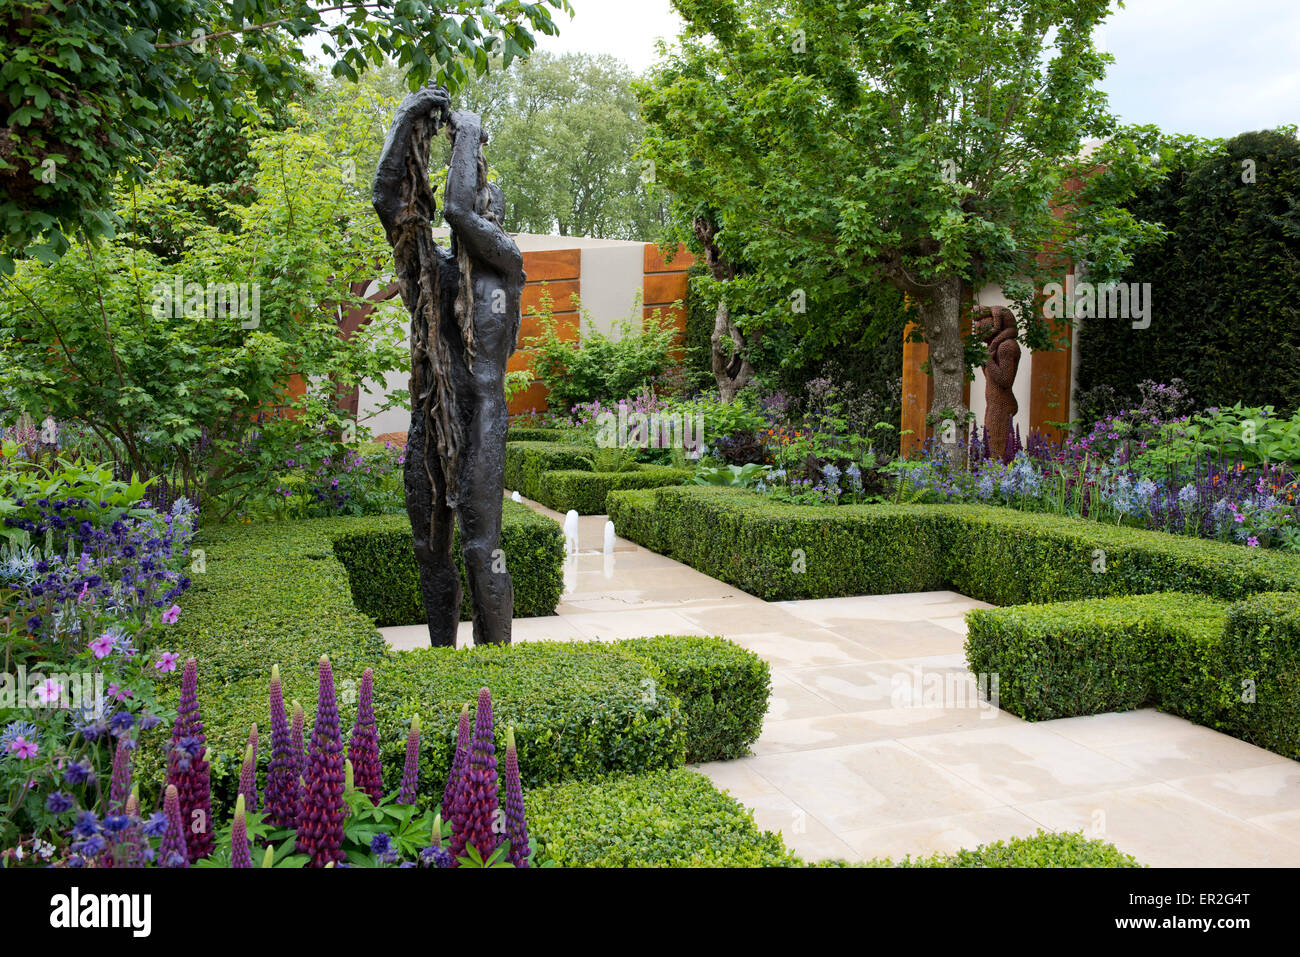 A bronze statue by Anna Gillespie in The Morgan Stanley Healthy Cities Garden at The Chelsea Flower Show Stock Photo